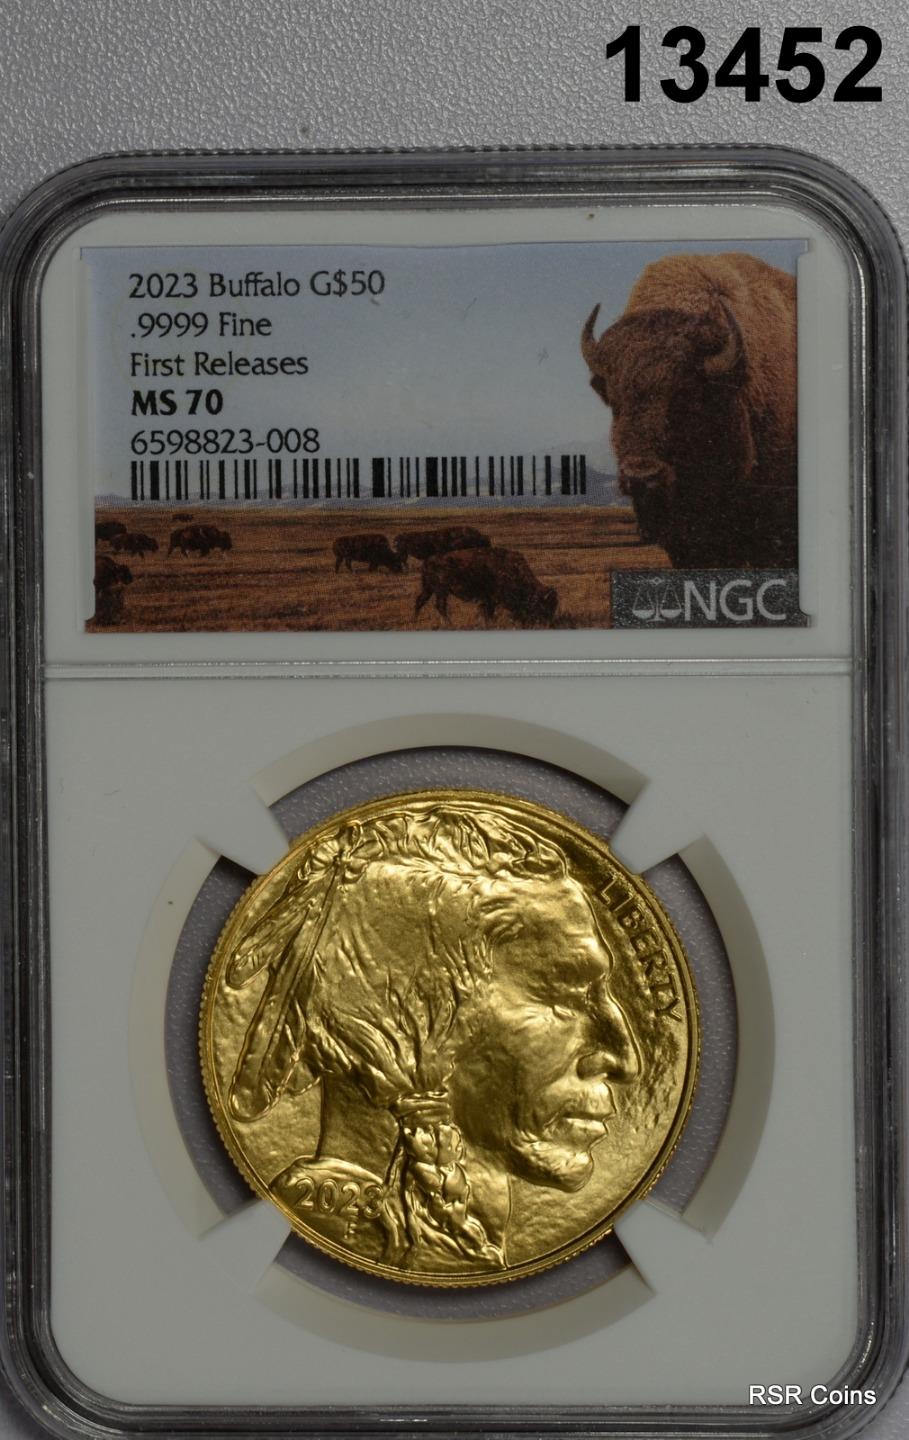 2023 $50 .9999 GOLD BUFFALO 10Z. NGC CERTIFIED MS70 FIRST RELEASE! #13452